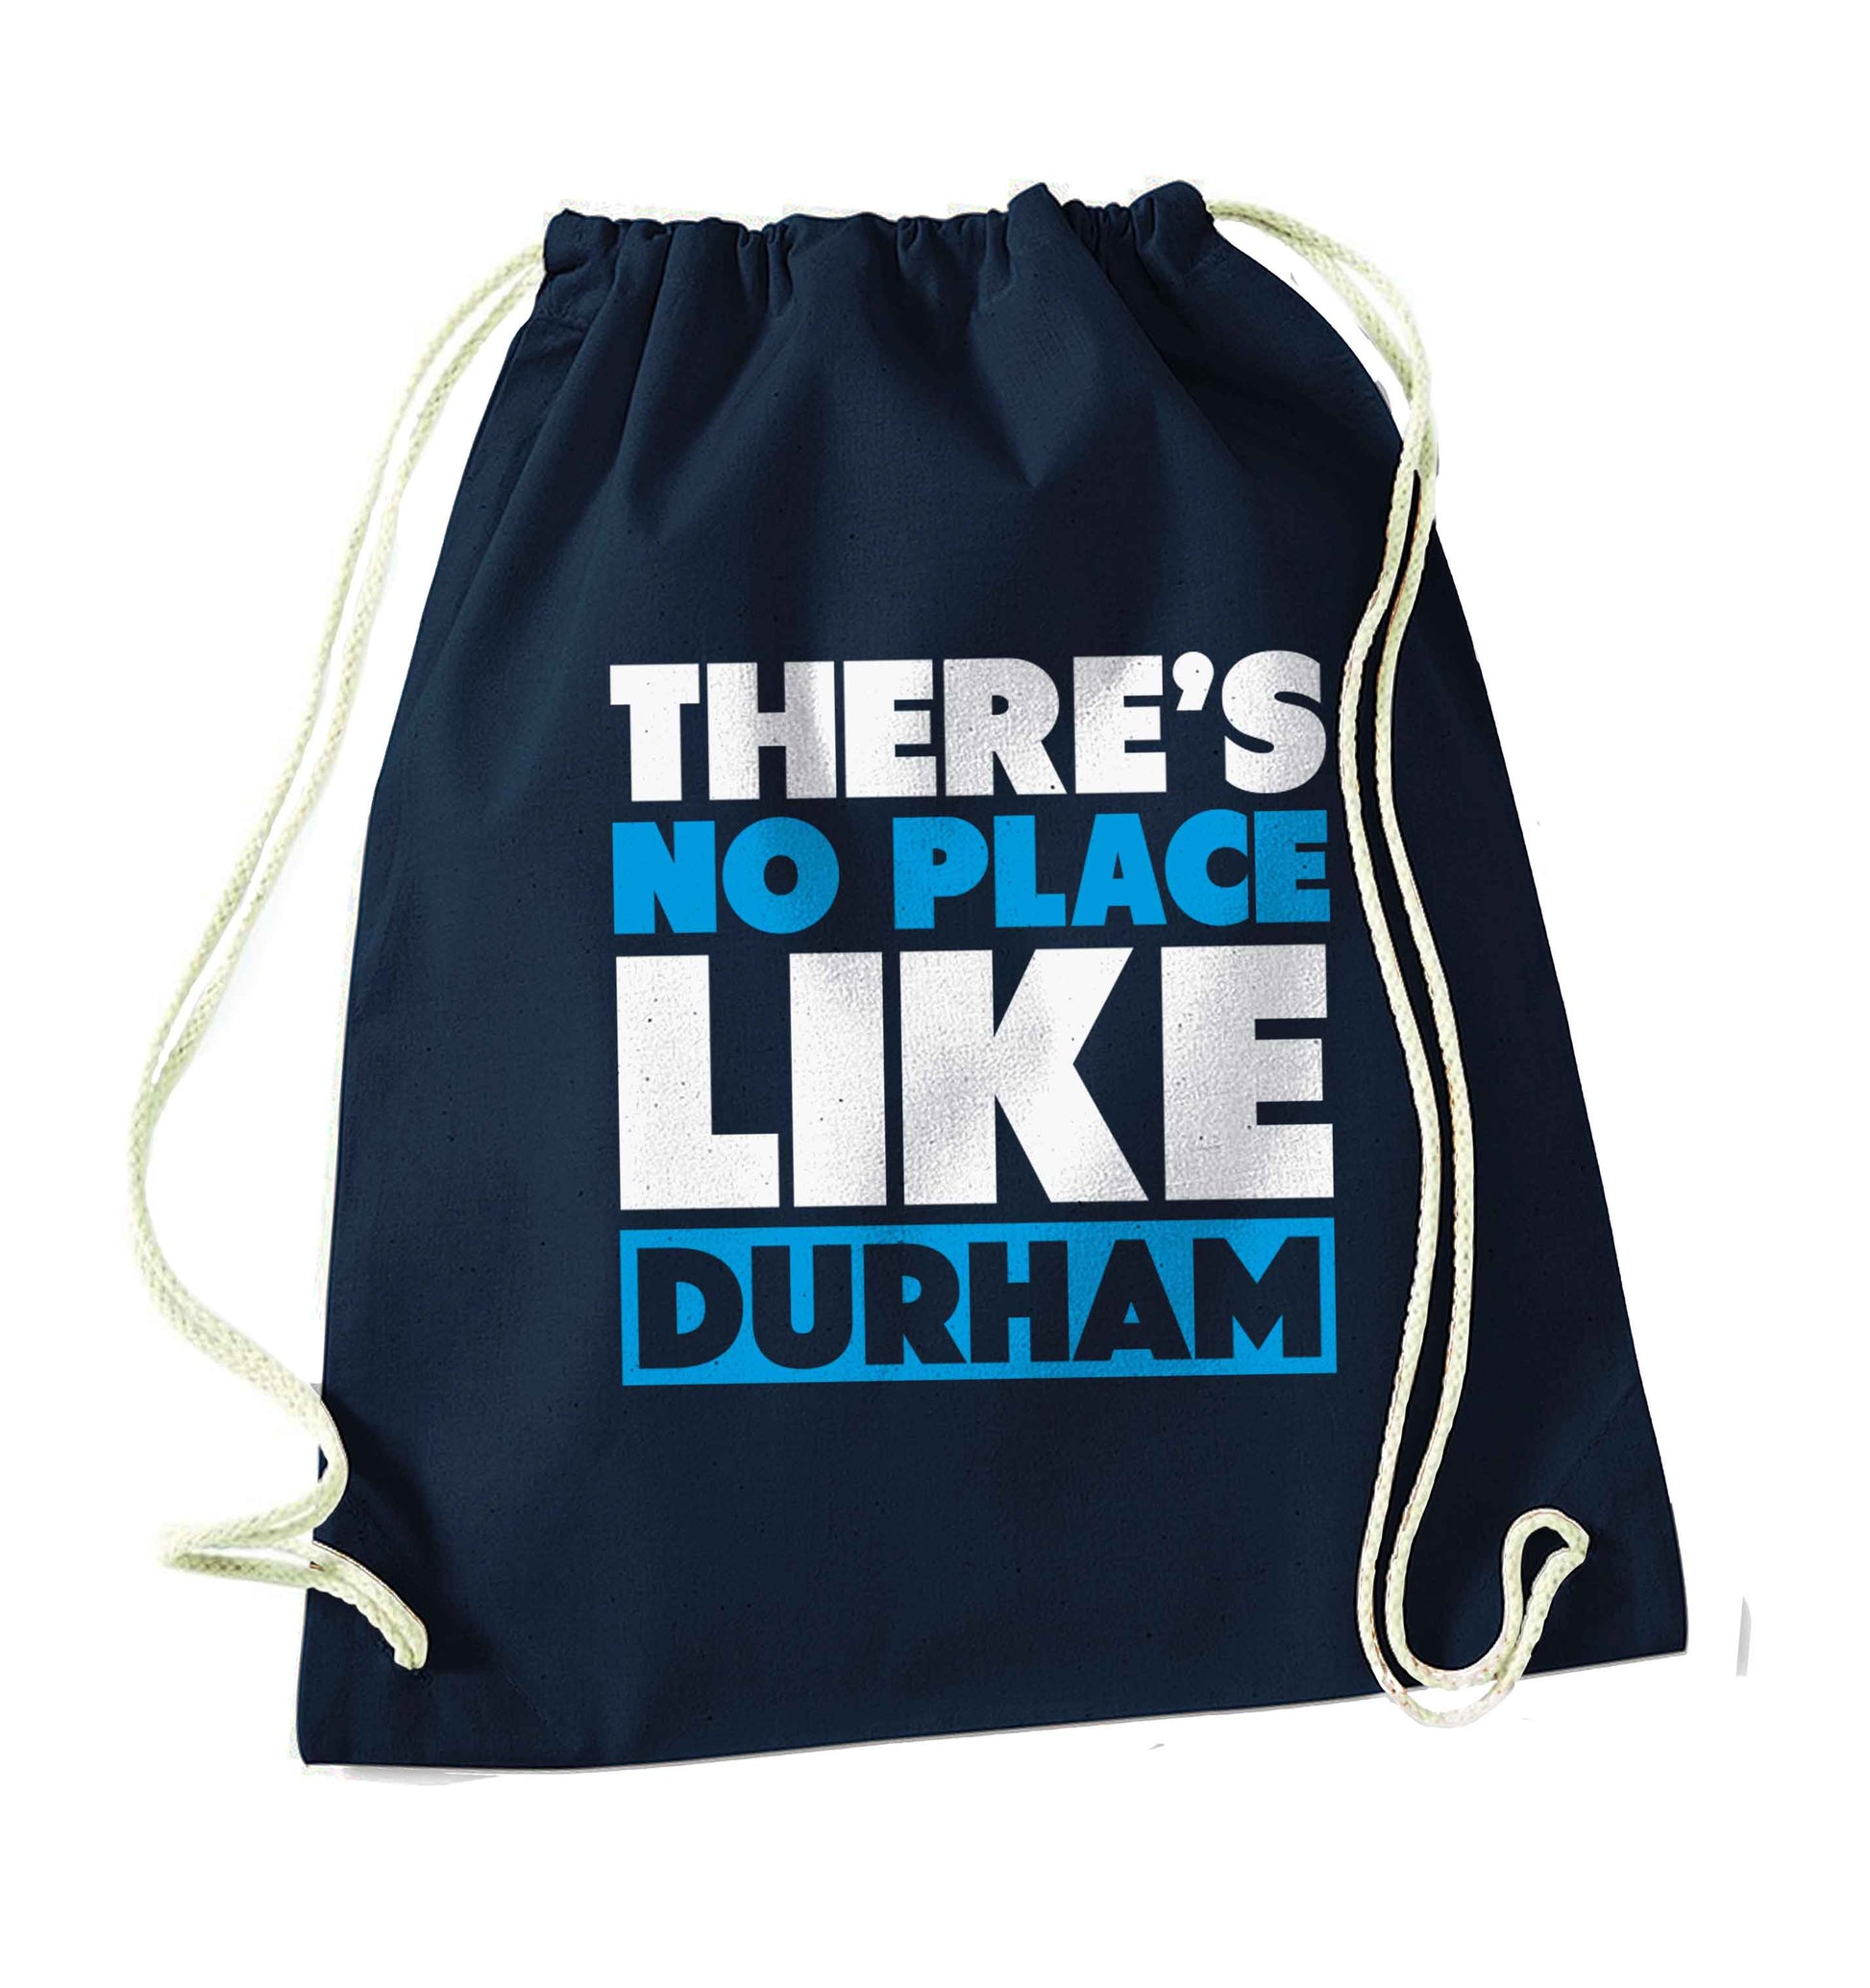 There's no place like Durham navy drawstring bag